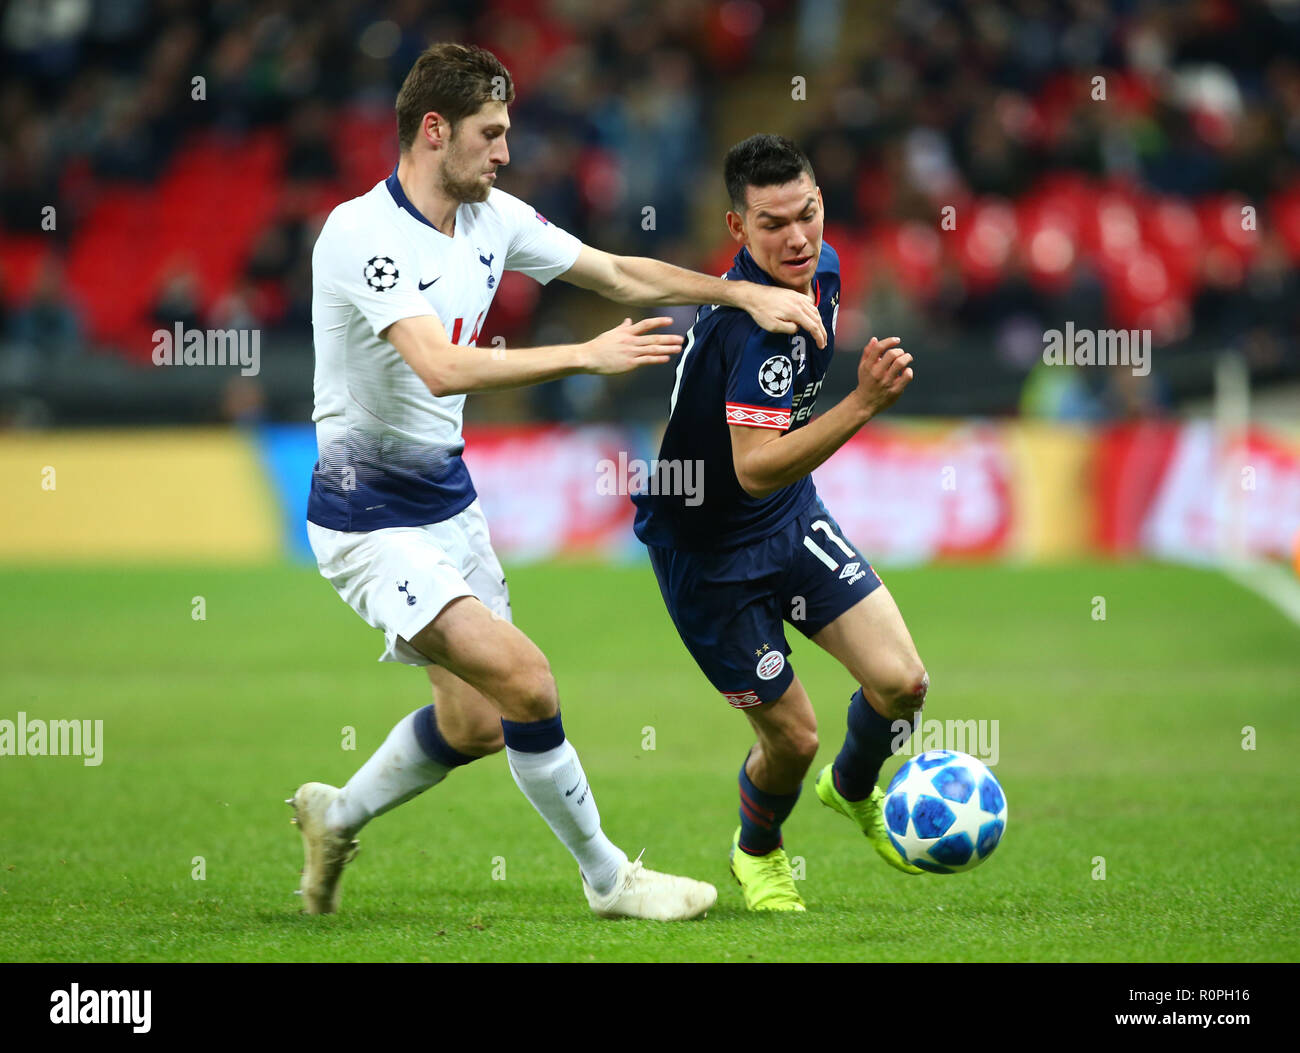 London, England, 06th November 2018.  L-R Tottenham Hotspur's Ben Davies and Hirving Lozano of PSV Eindhoven during Champion League Group B between Tottenham Hotspur and PSV Eindhoven at Wembley stadium , London, England on 06 Nov 2018. Credit Action Foto Sport  FA Premier League and Football League images are subject to DataCo Licence. Editorial use ONLY. No print sales. No personal use sales. NO UNPAID USE Credit: Action Foto Sport/Alamy Live News Stock Photo